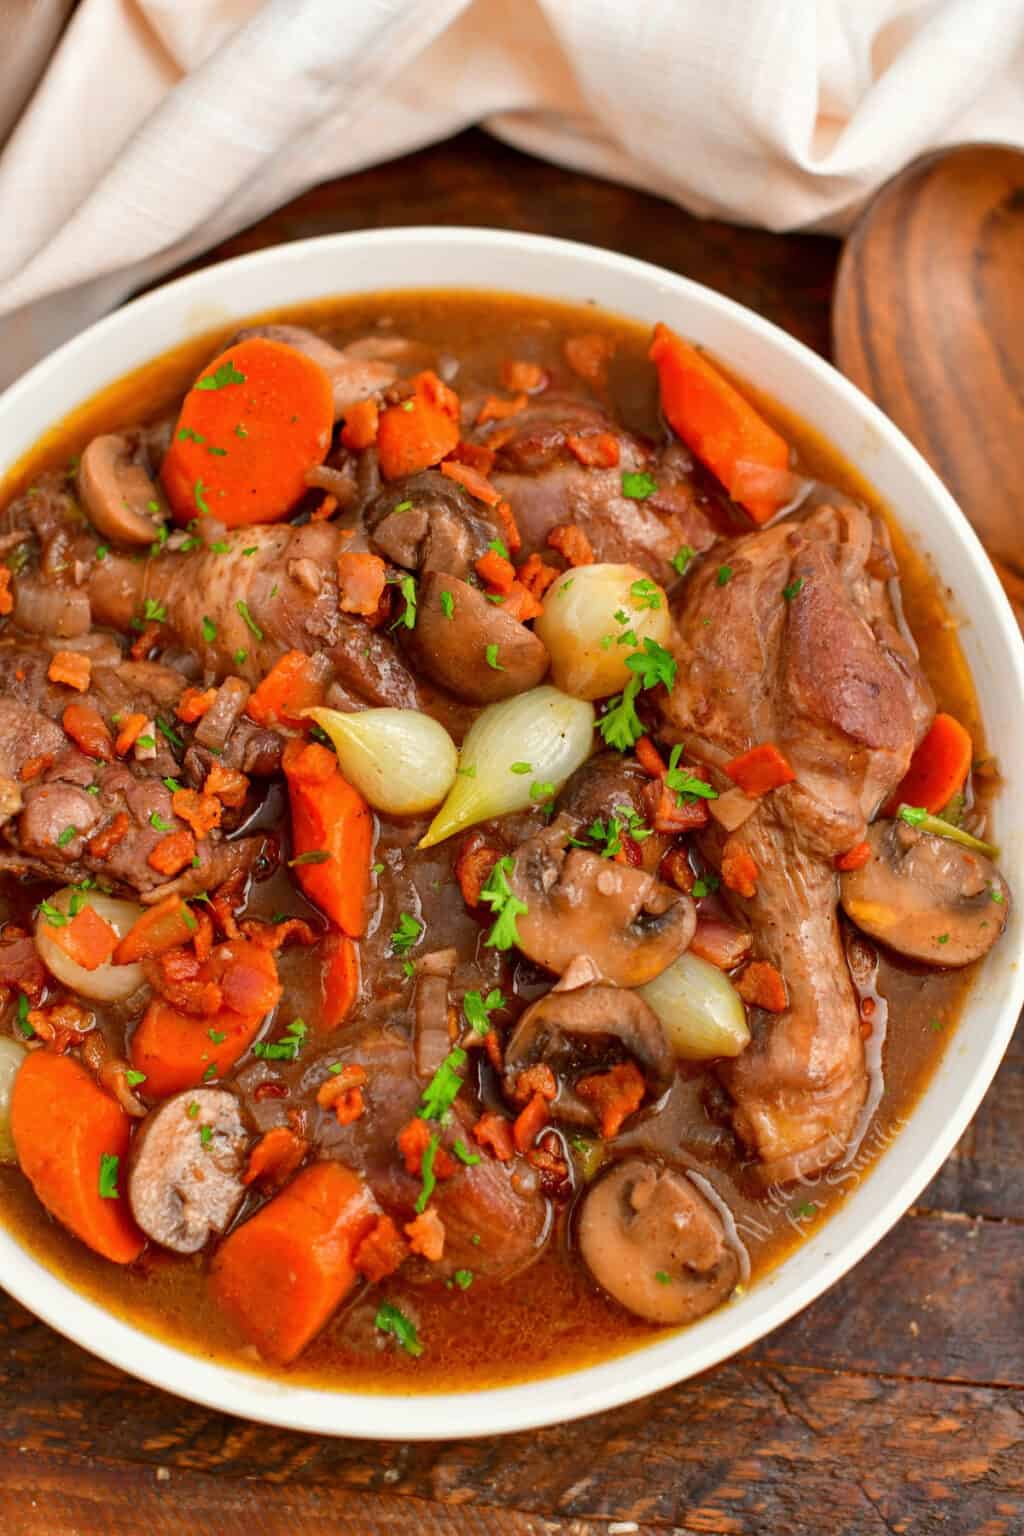 Coq Au Vin - Learn To Make This Classic French Chicken Recipe At Home!